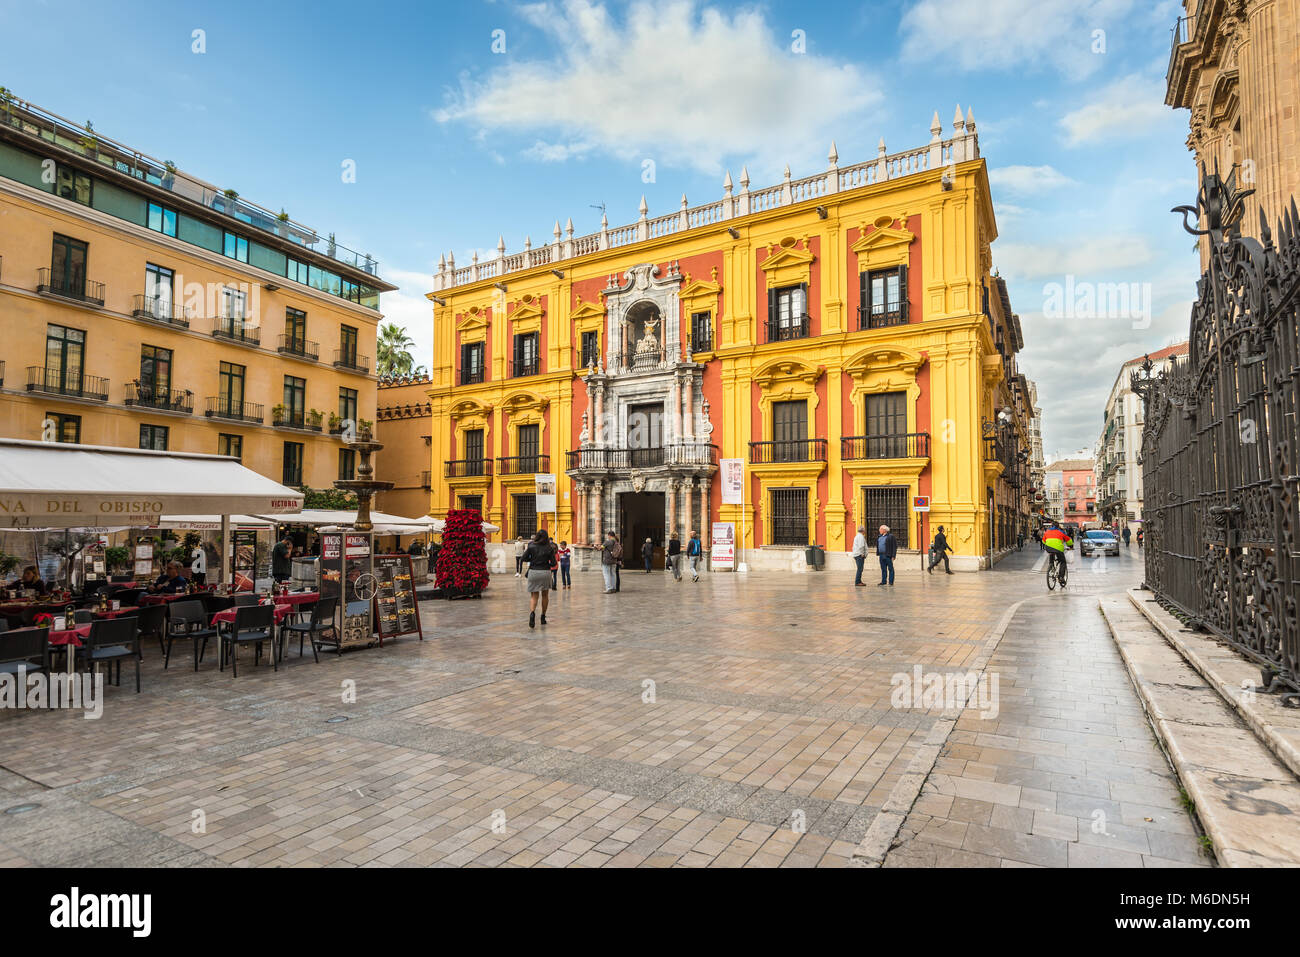 Malaga, Spain - December 7, 2016: Episcopal palace facade and tourist sitting on the restaurants terraces and walking around Bishop Square in Malaga c Stock Photo